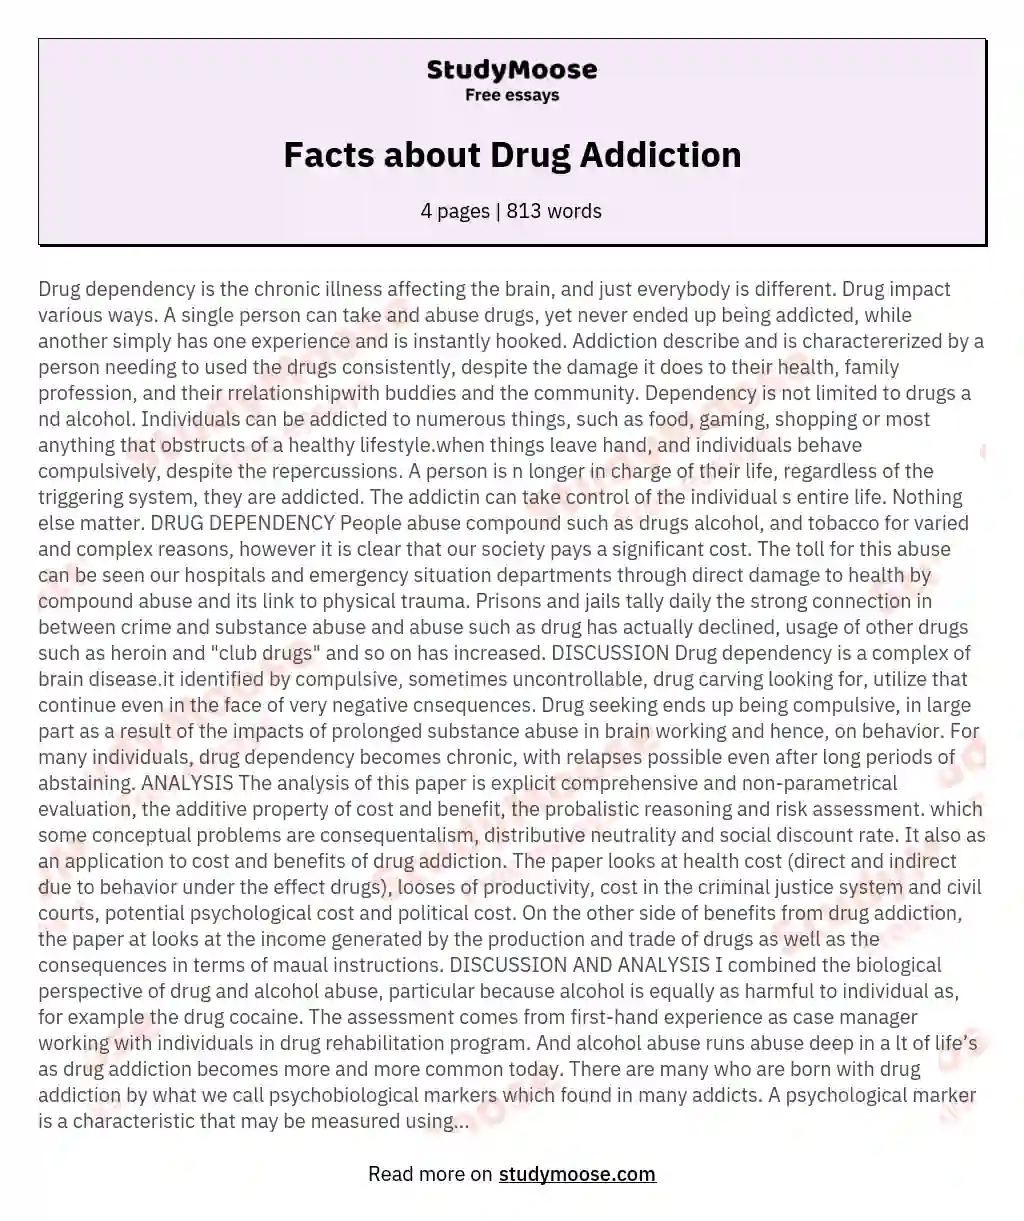 Facts about Drug Addiction essay